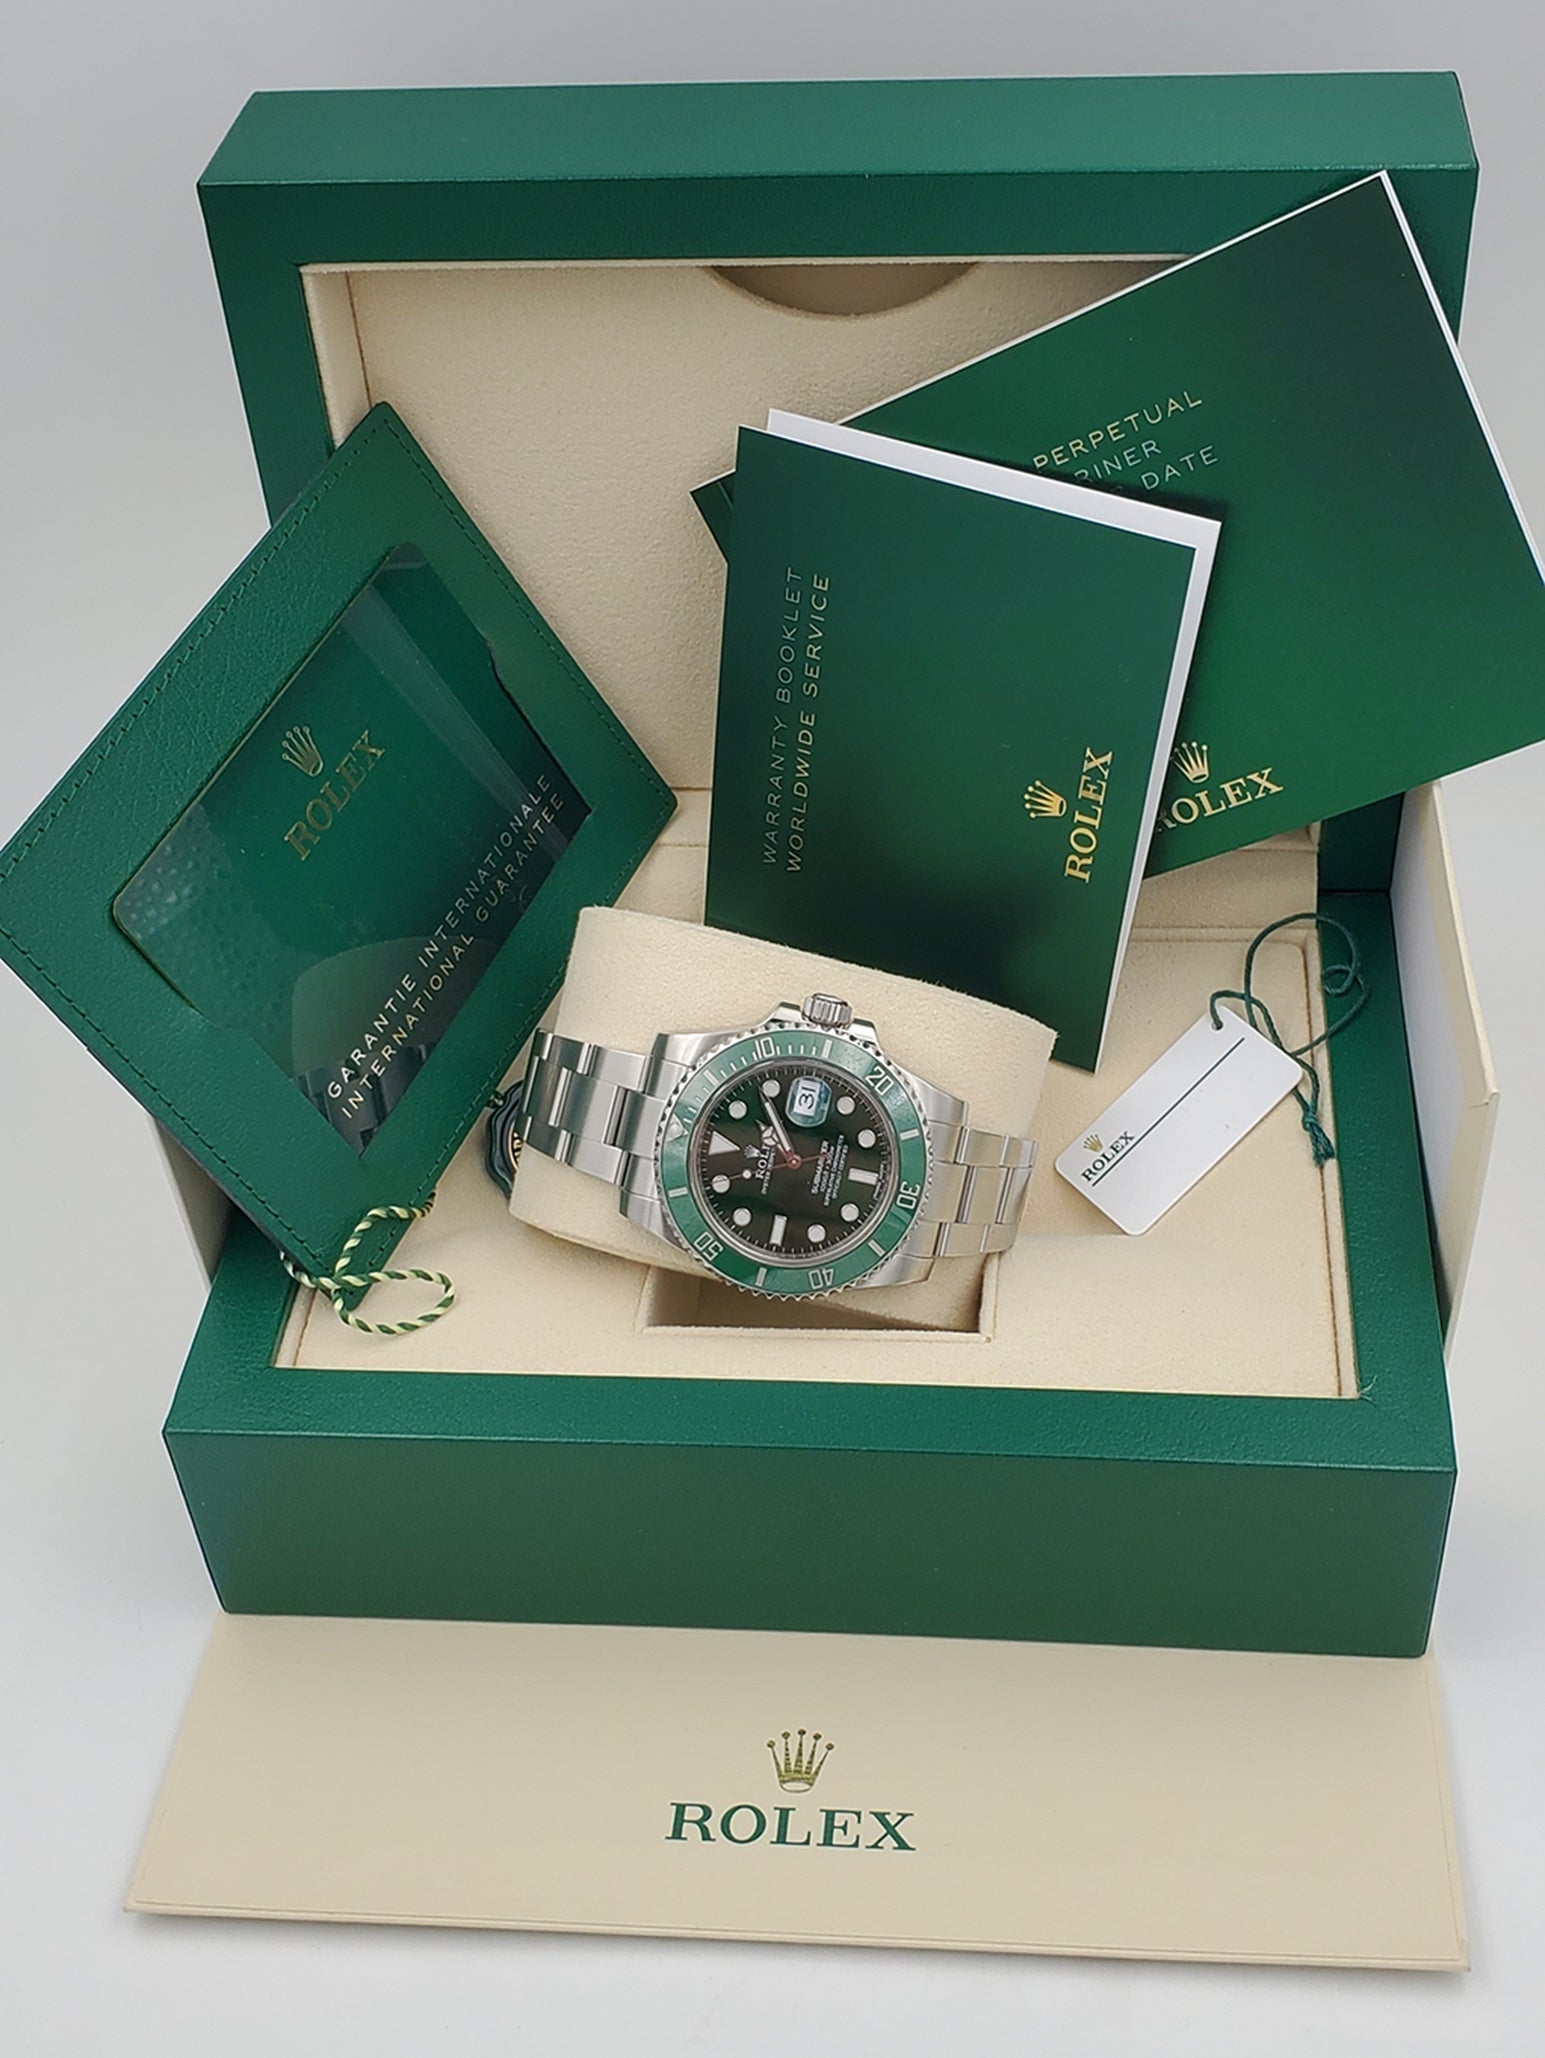 Men's Rolex 40mm Submariner Date Oyster Perpetual Stainless Steel Watch with Green Dial and Green Bezel. (Pre-Owned 116610LV)